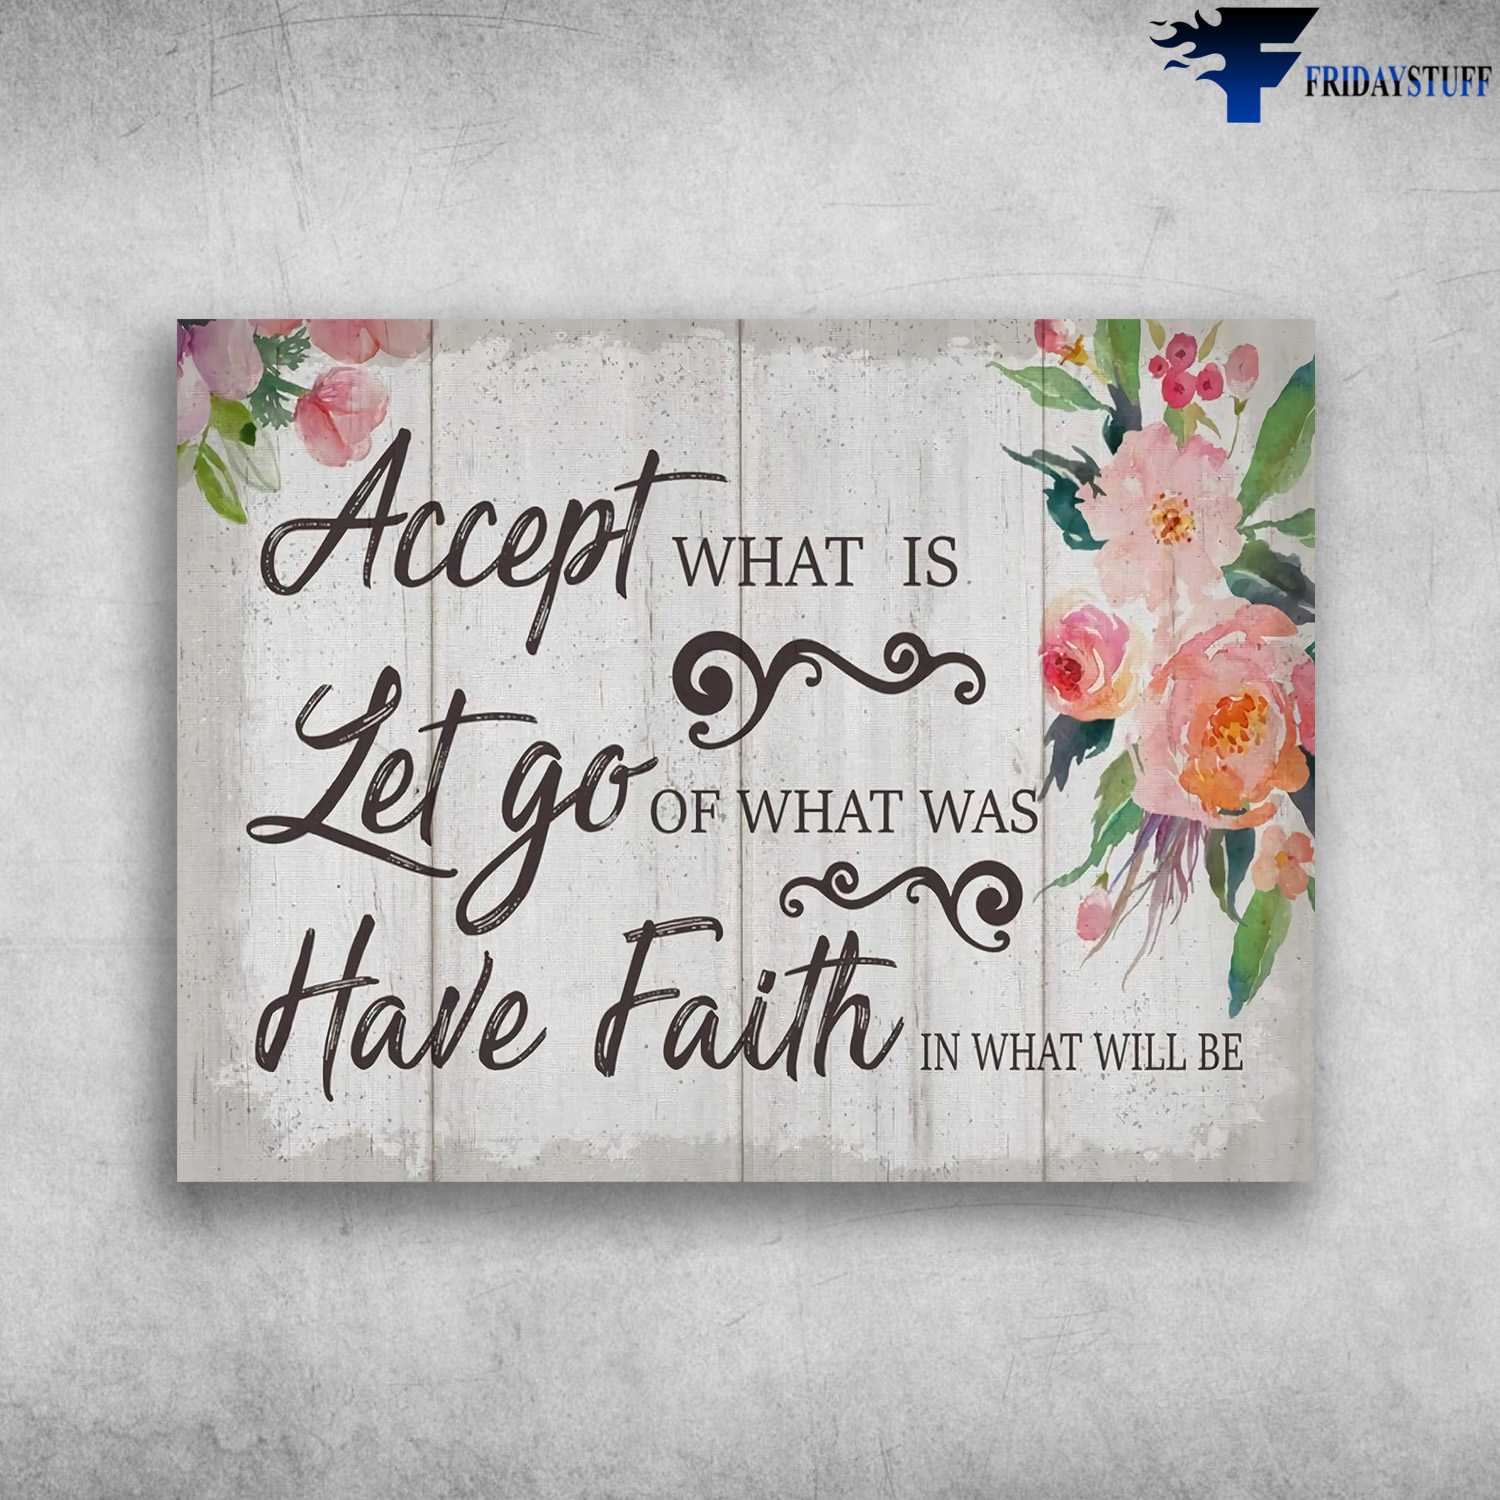 Flower Poster, Wall Art Poster, Accept What If, Let Go Of What Was, Have Faith In What Will Be